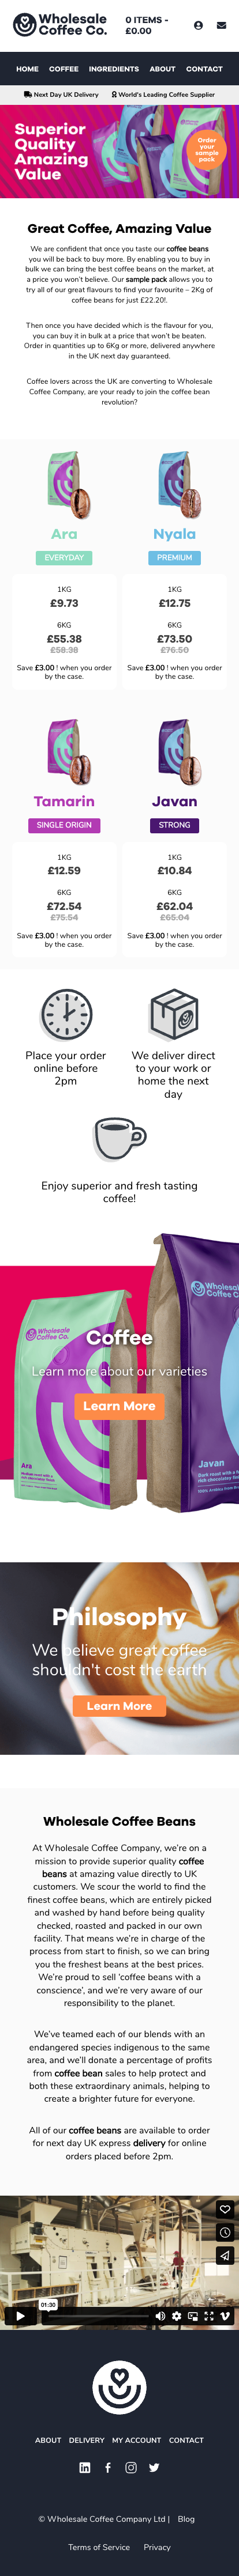 Wholesale Coffee website on a mobile device